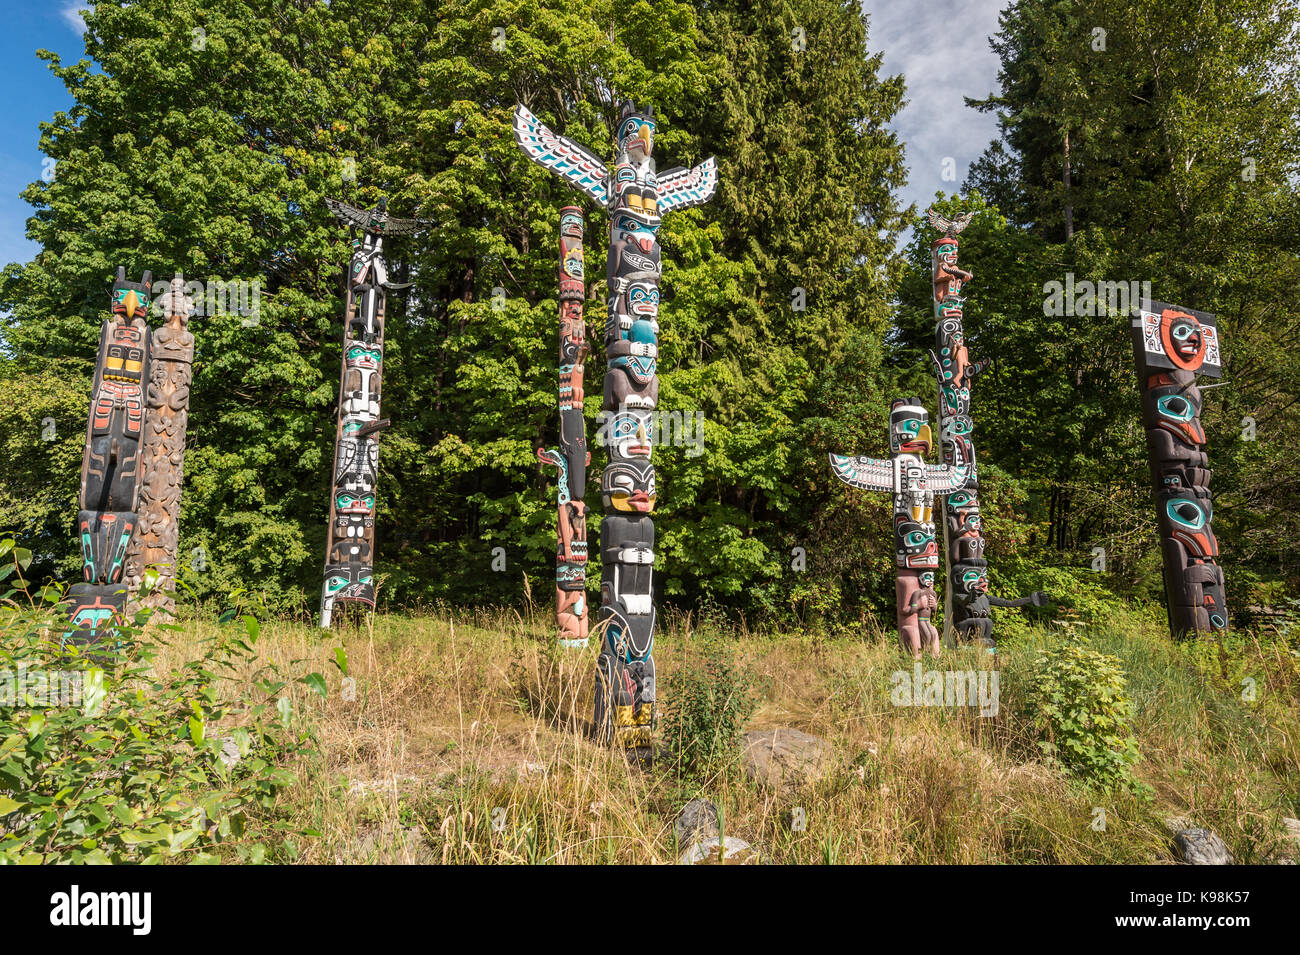 Vancouver, British Columbia, Canada - 12 September 2017: First Stock Photo  - Alamy